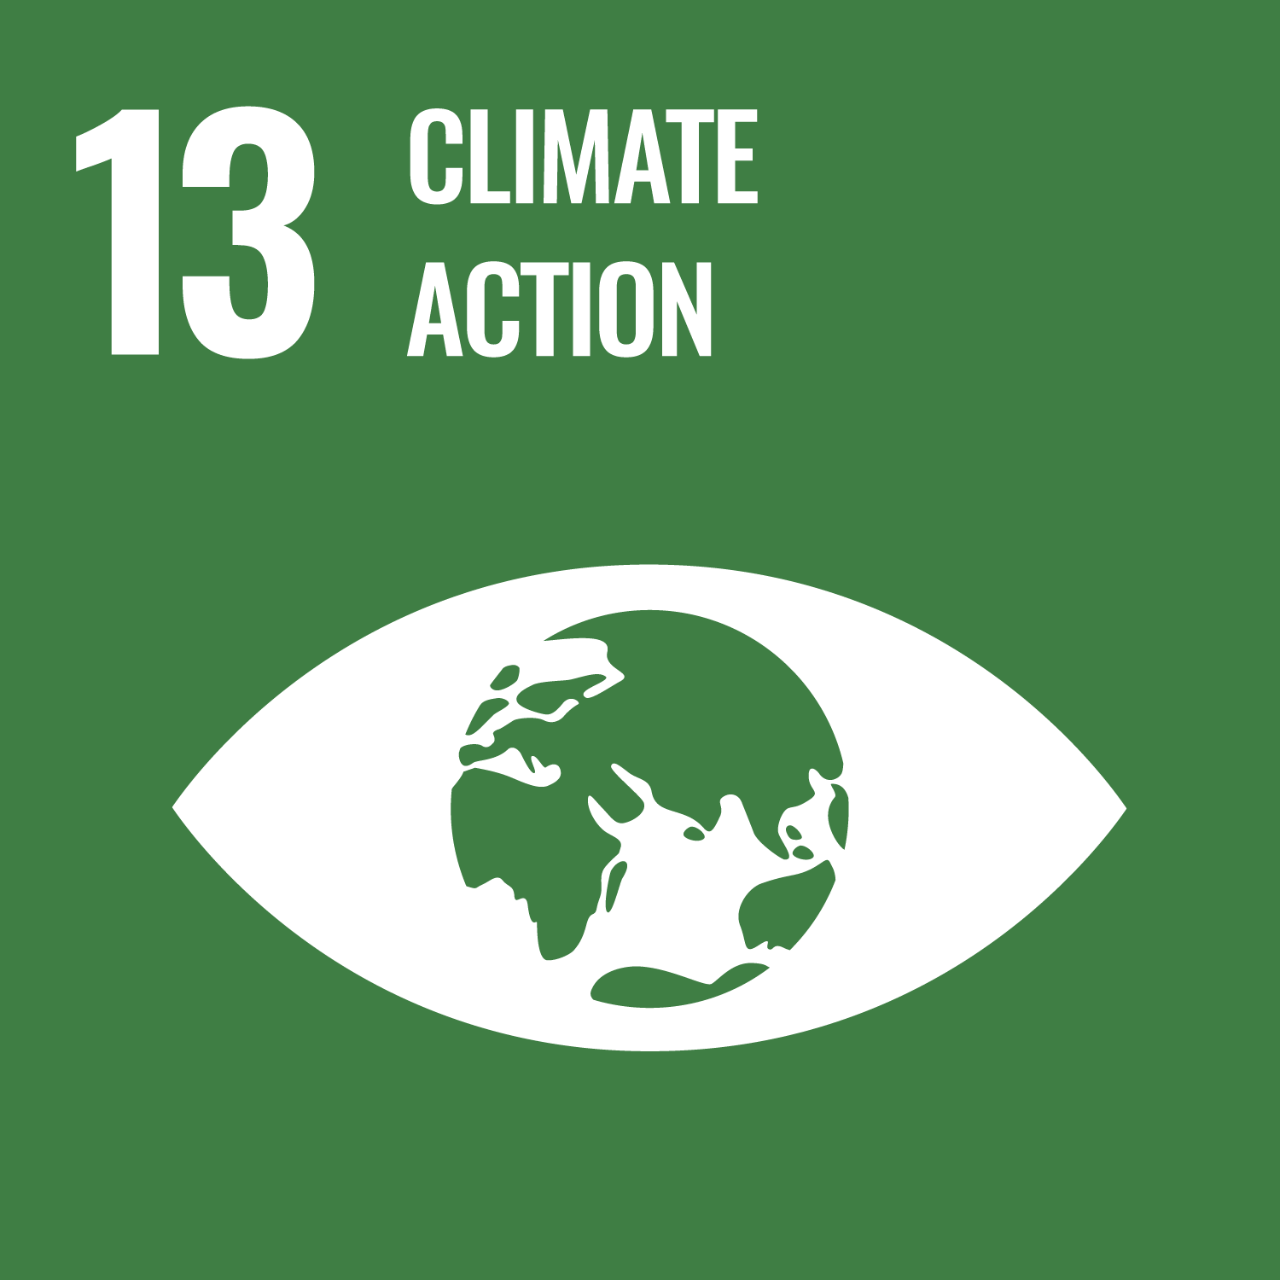 Green icon with graphic of the globe in an eye to represent UNSDG Goal 13: Climate Action.